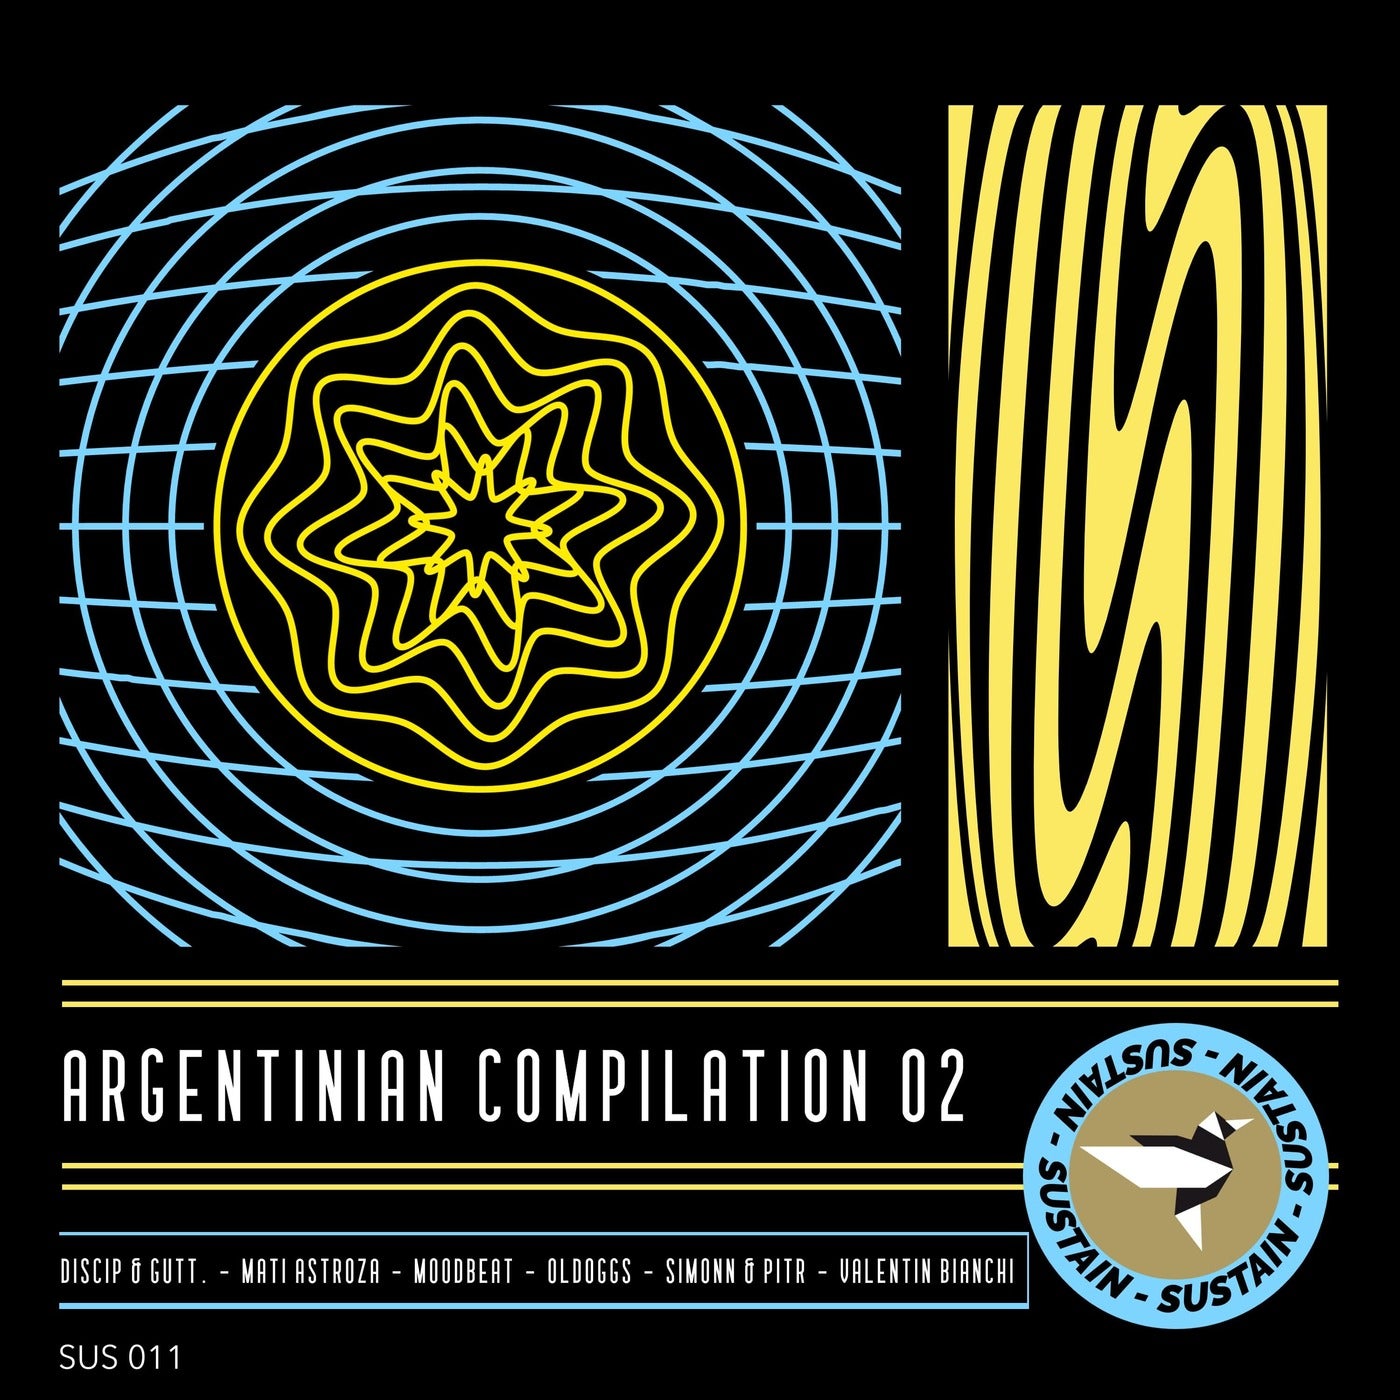 Argentinian Compilation 02